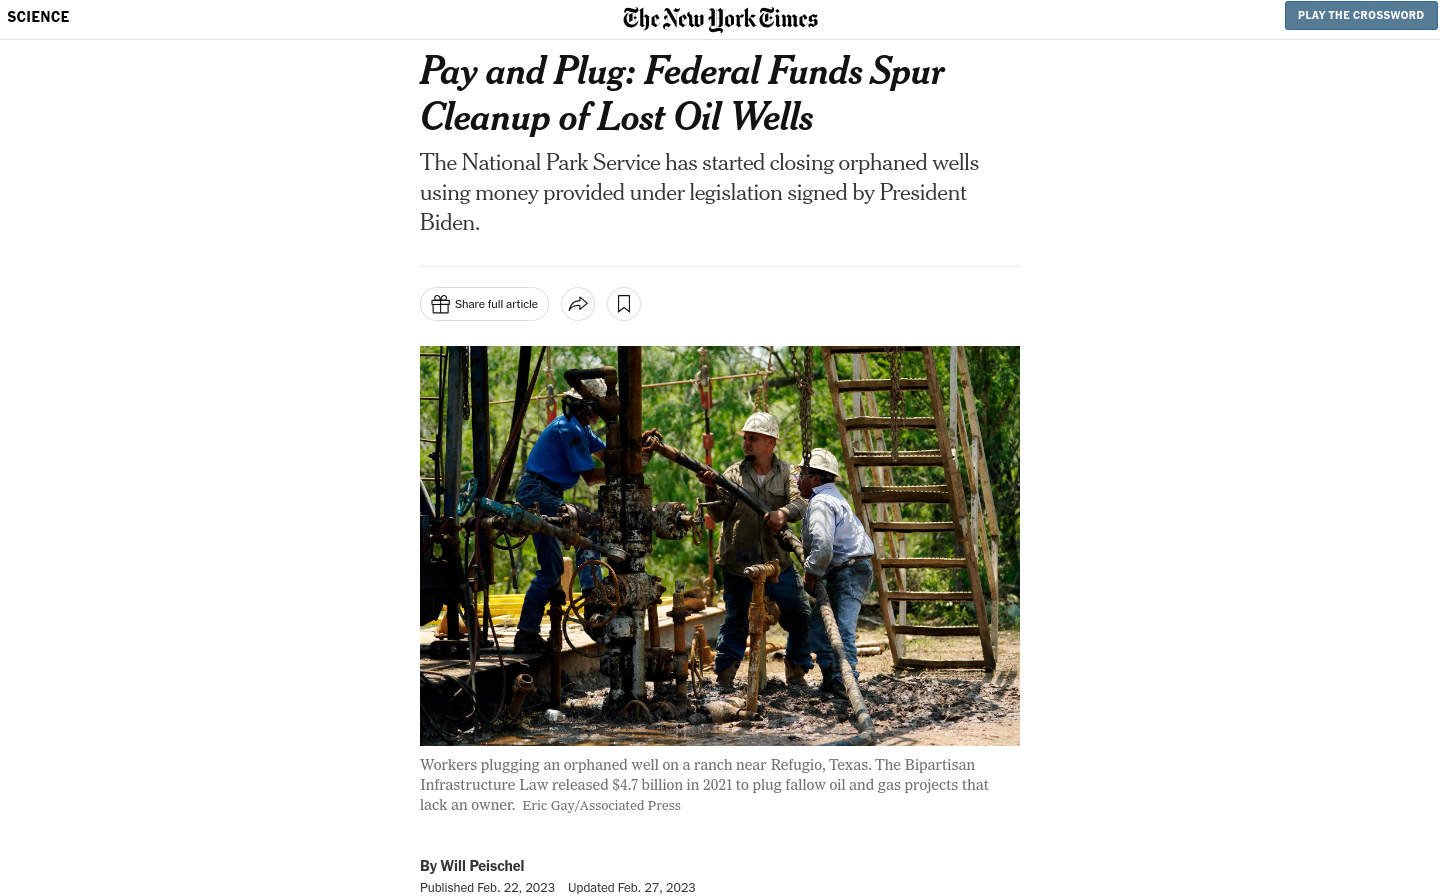 New York Times - Pay and Plug: Federal Funds Spur Cleanup of Lost Oil Wells (February 22, 2023)